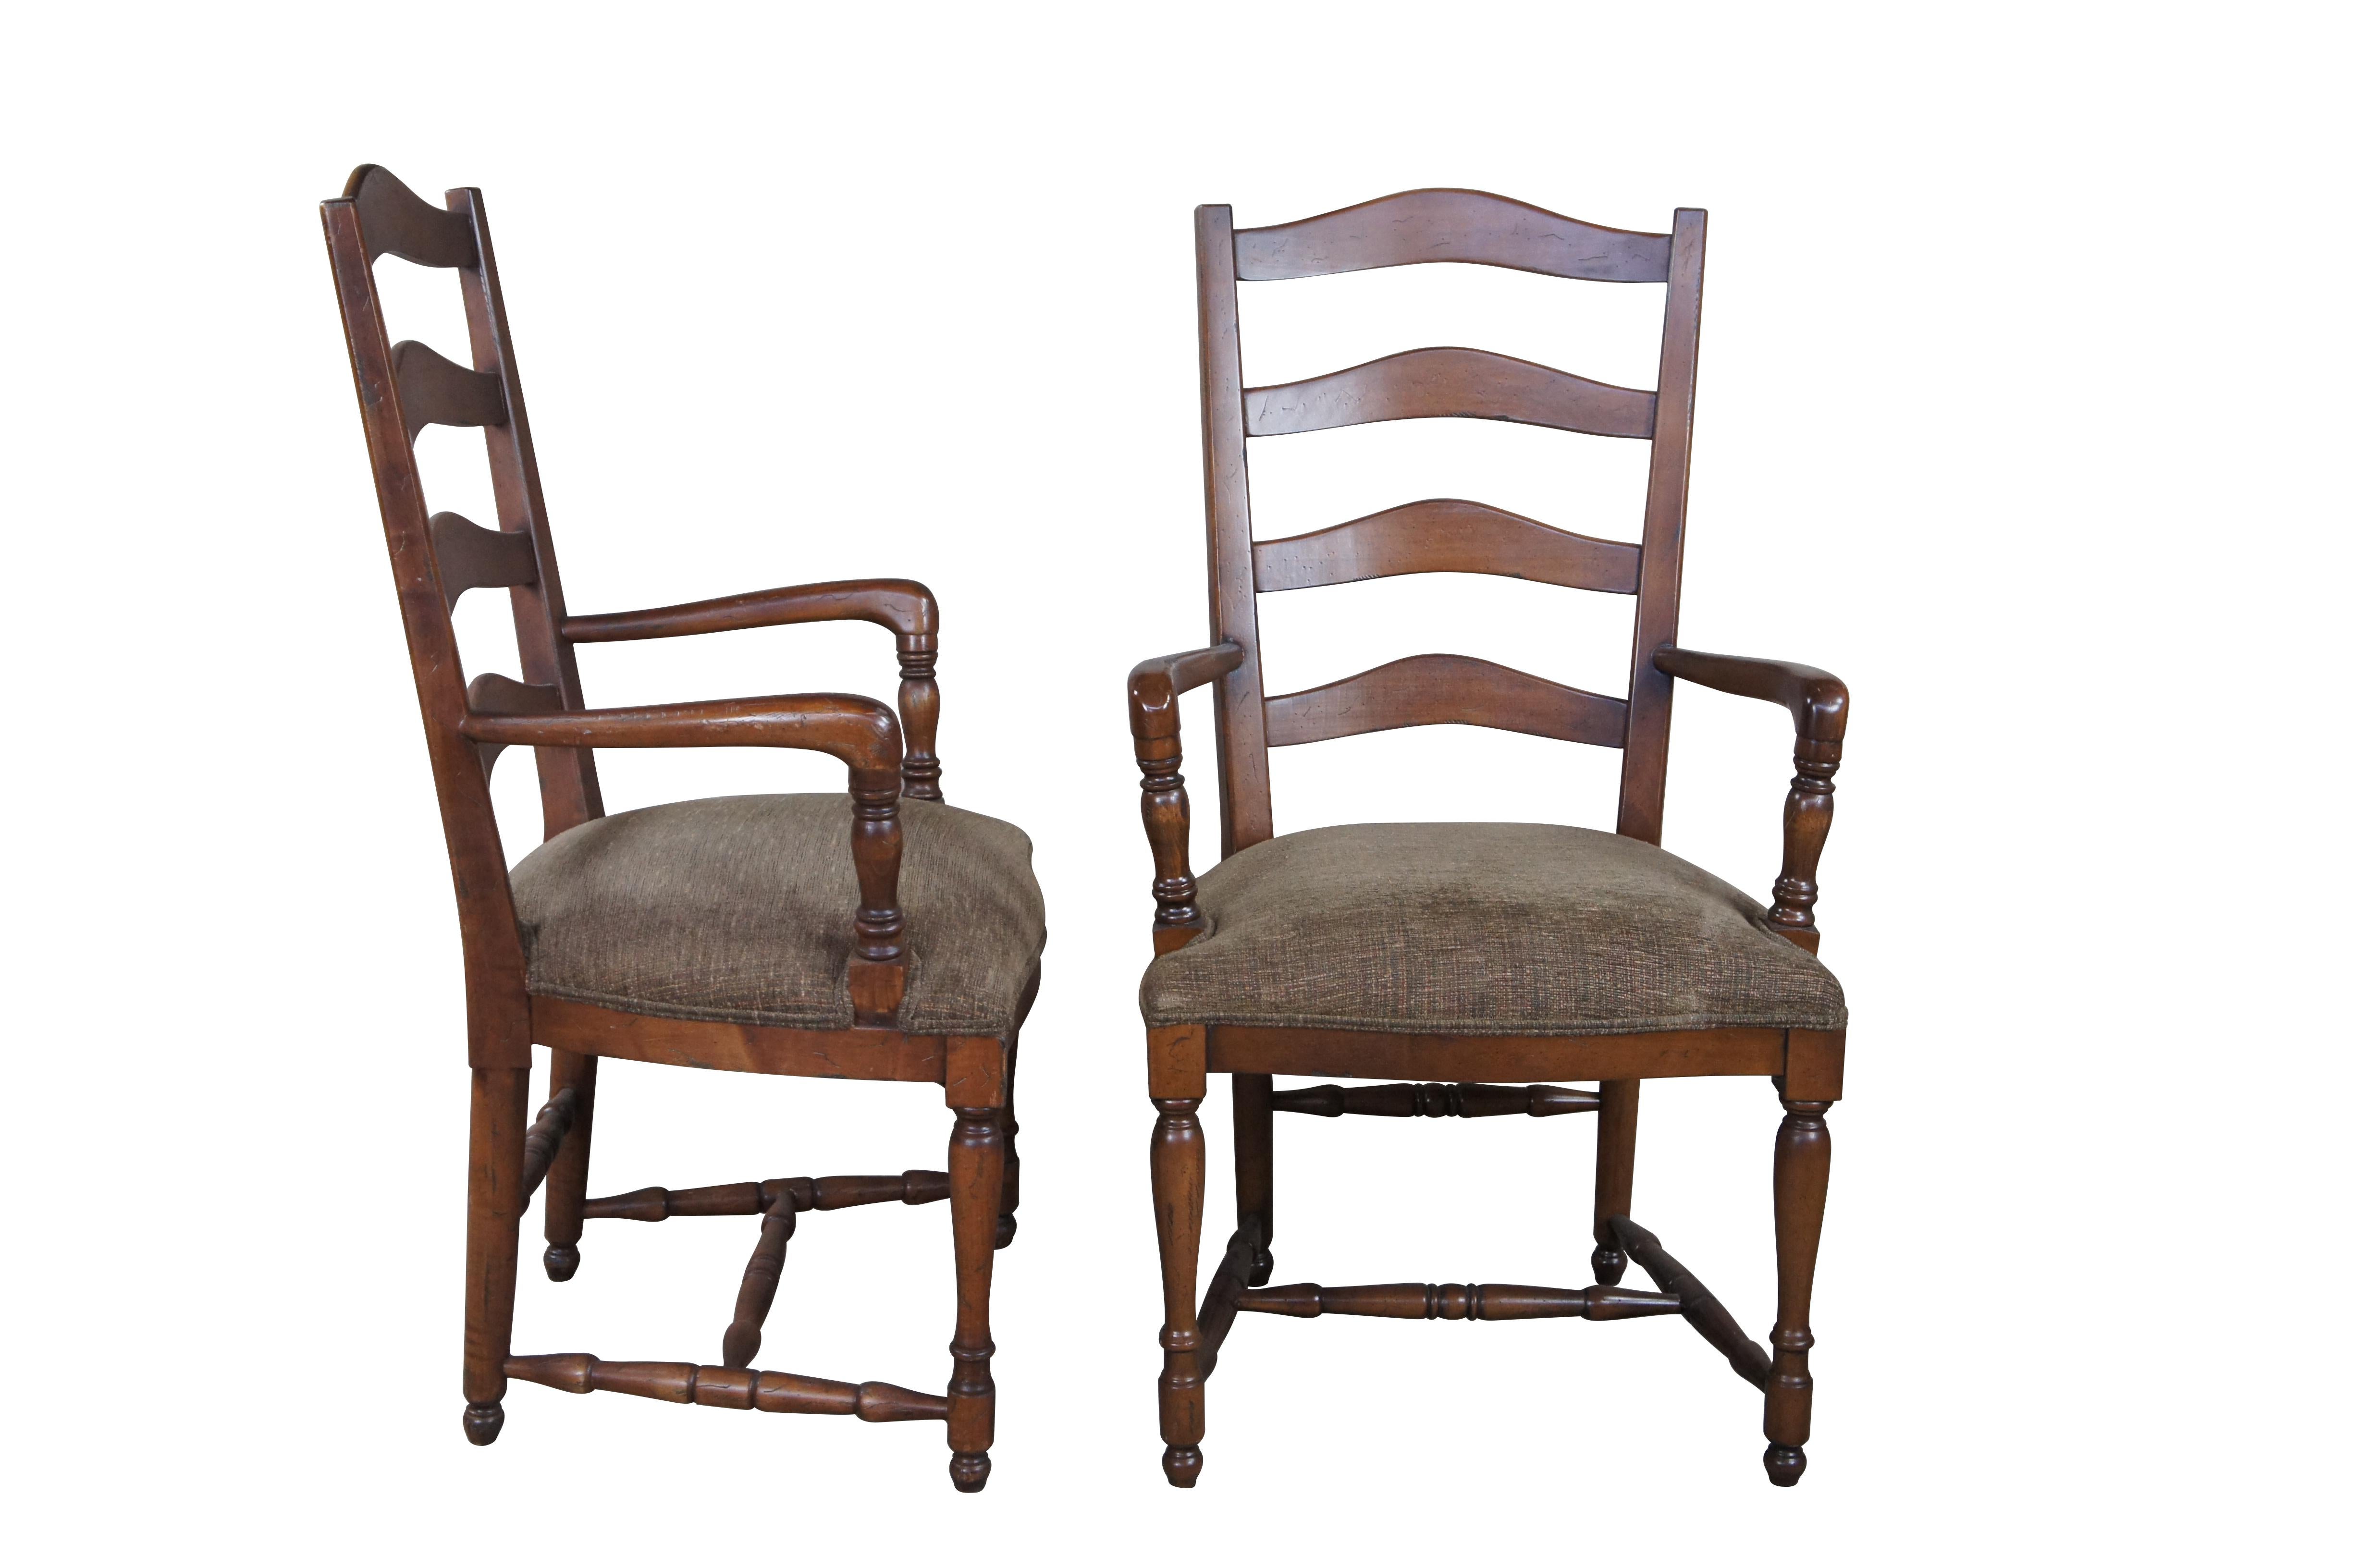 4 vintage country French dining chairs, circa late 20th century.  Attributed to Guy Chaddock.  Features a distressed oak frame with ladderback, leading to pronounced arms over an upholstered seat and turned legs with an H stretcher and turnip